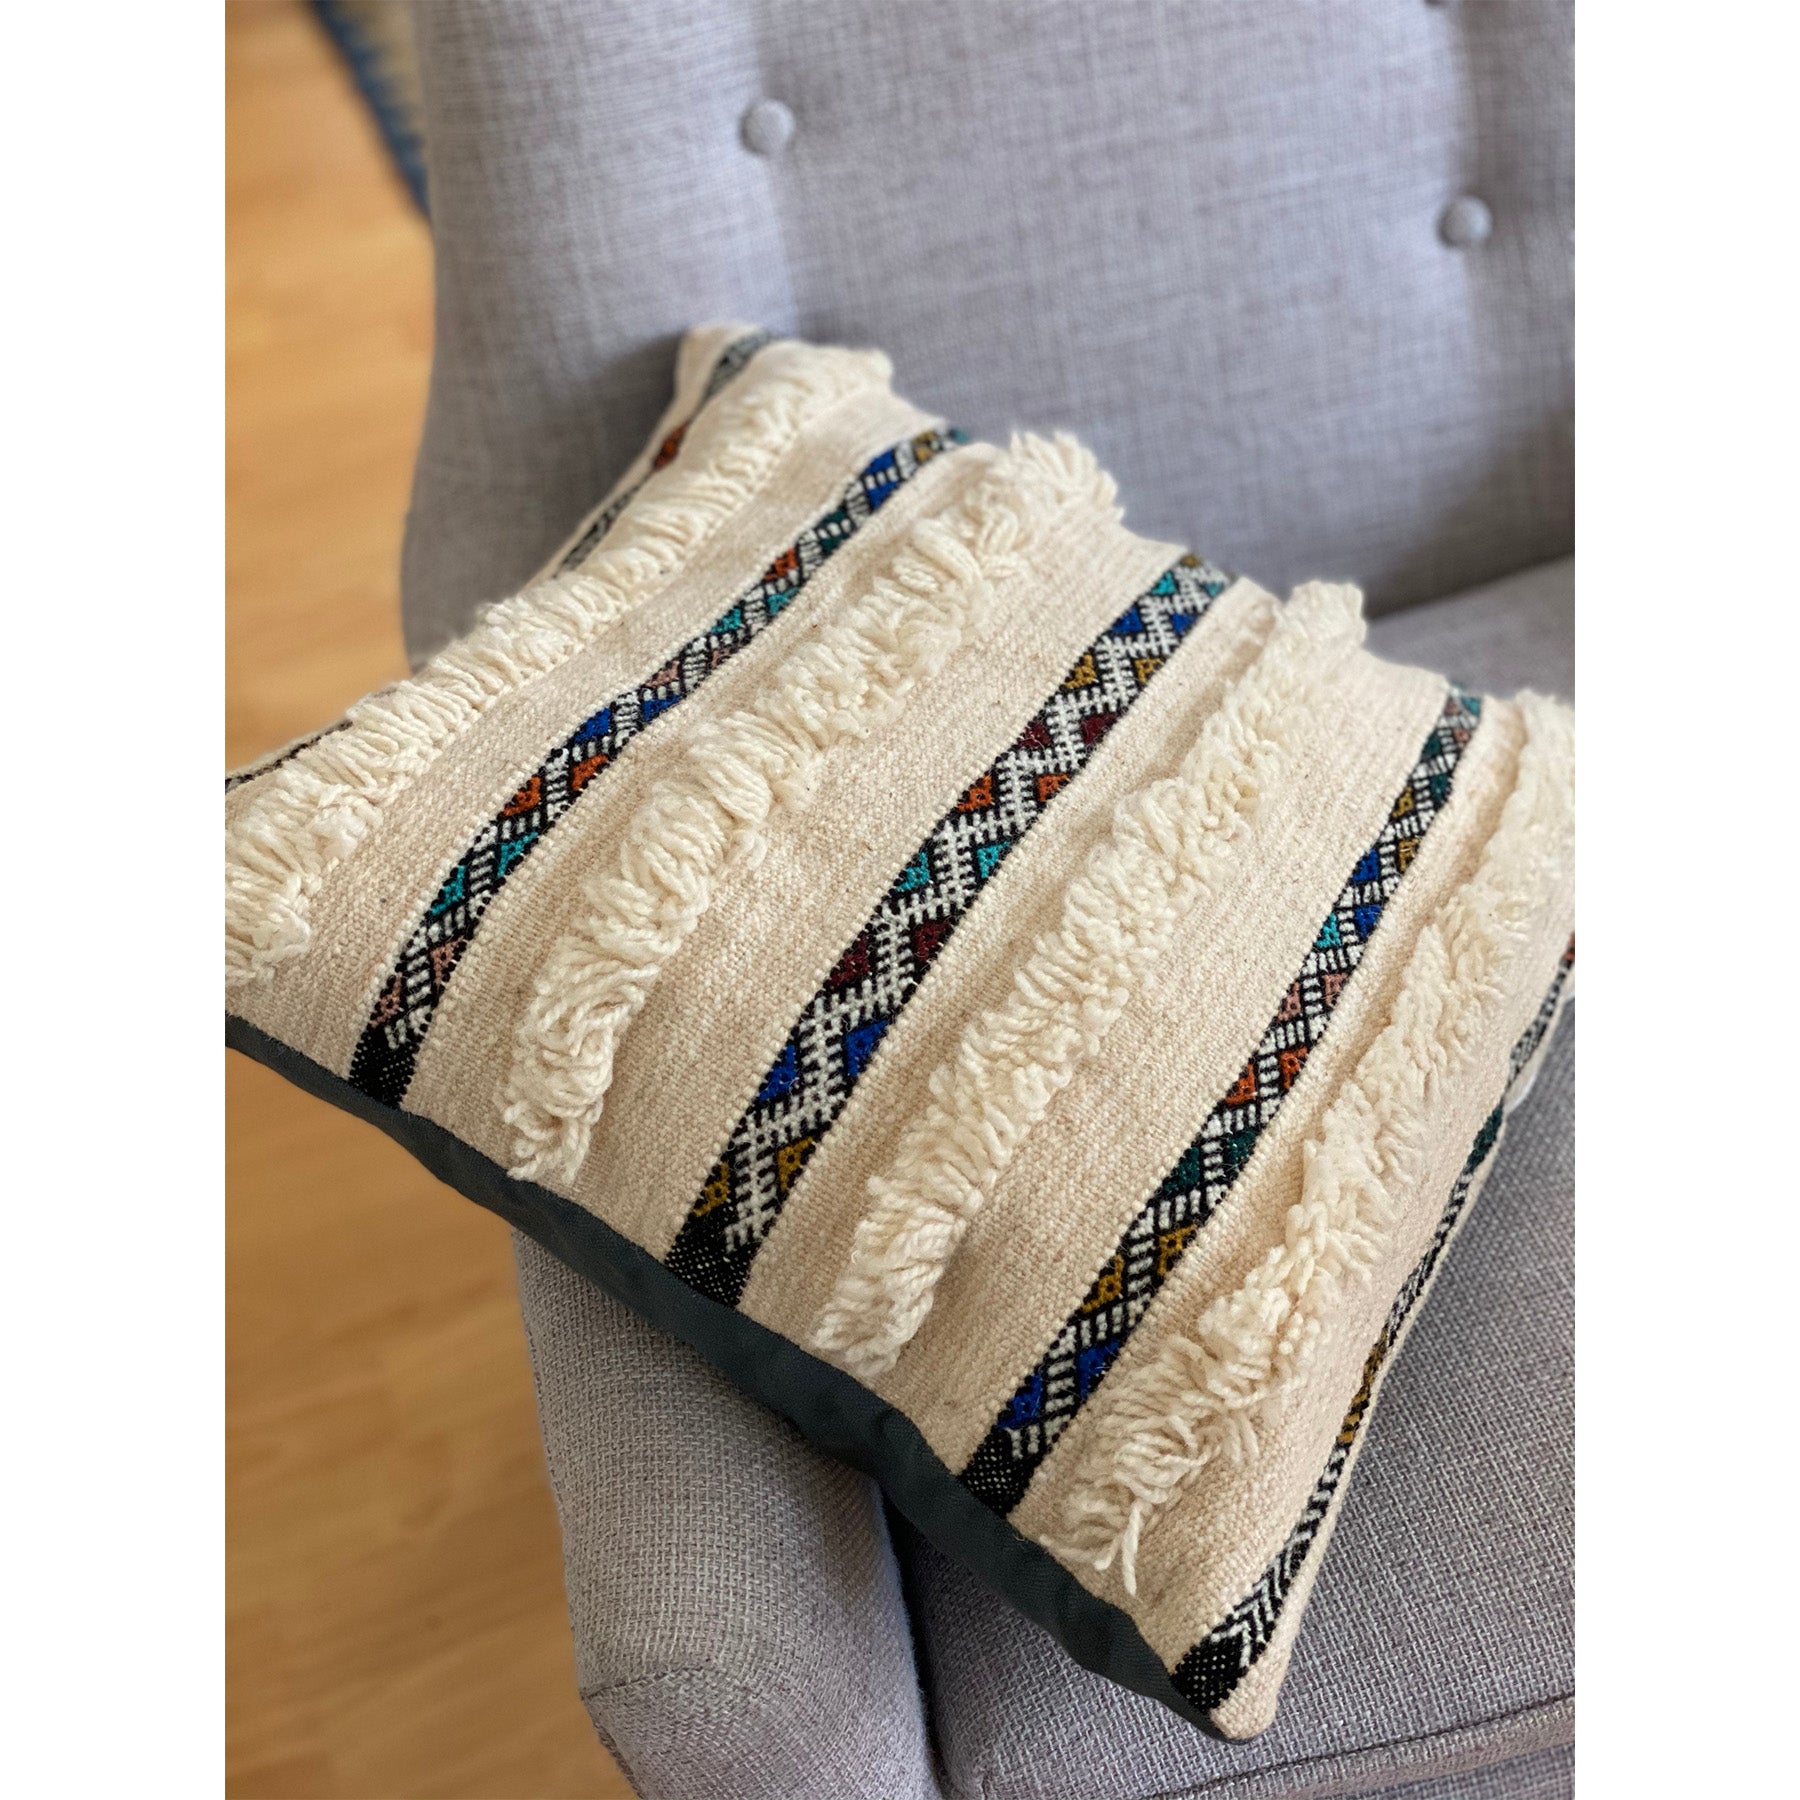 Colorful wedding blanket pillow with tufted bands interspersed with colorful geometric weaving